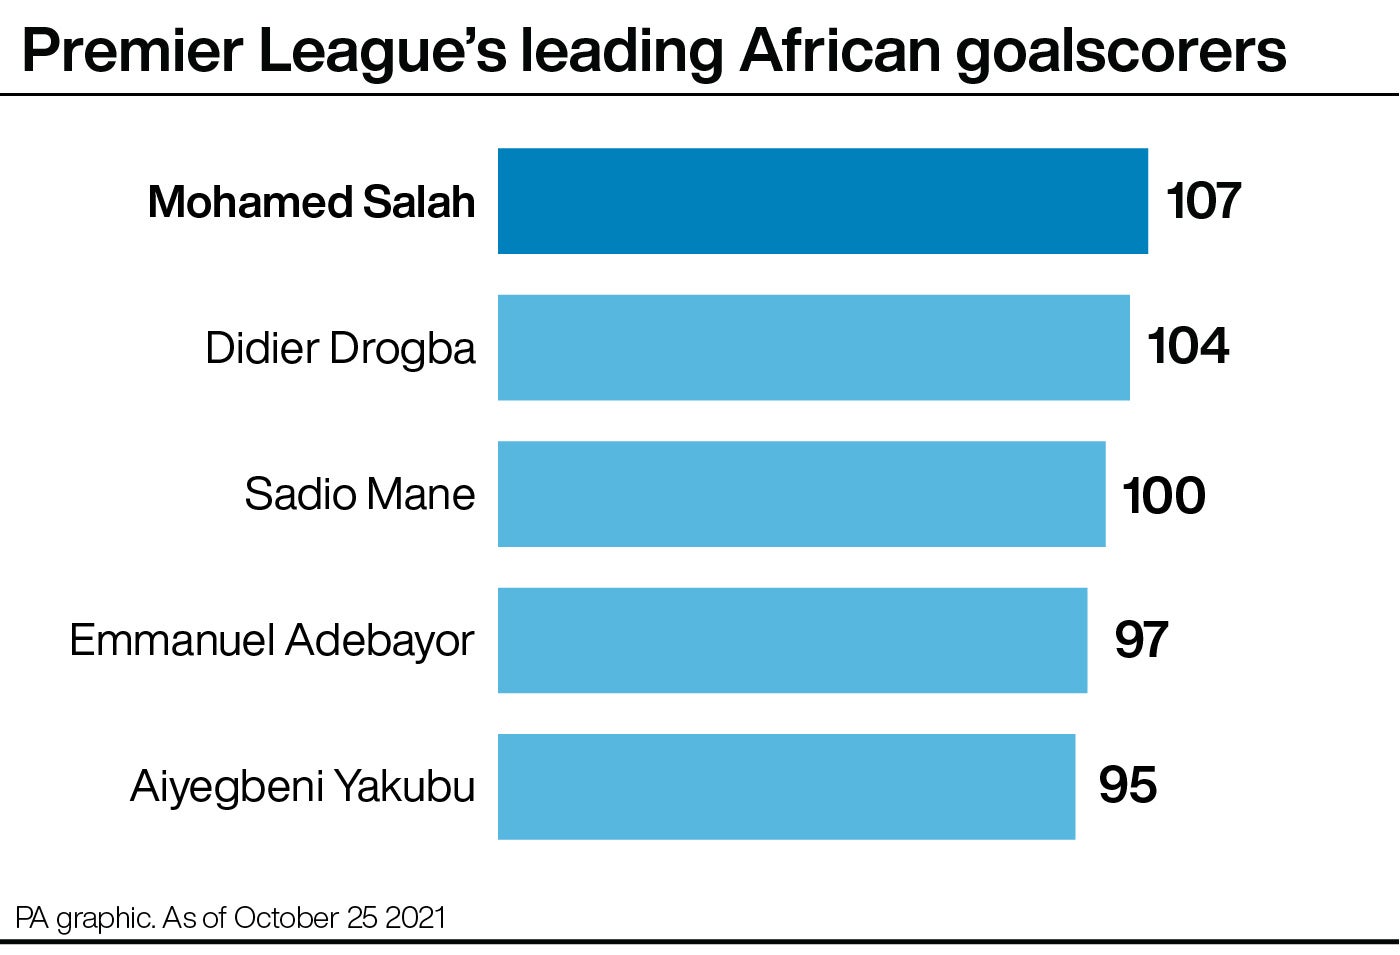 Mohamed Salah moved clear of Didier Drogba as the Premier League’s leading African goalscorer (PA graphic)